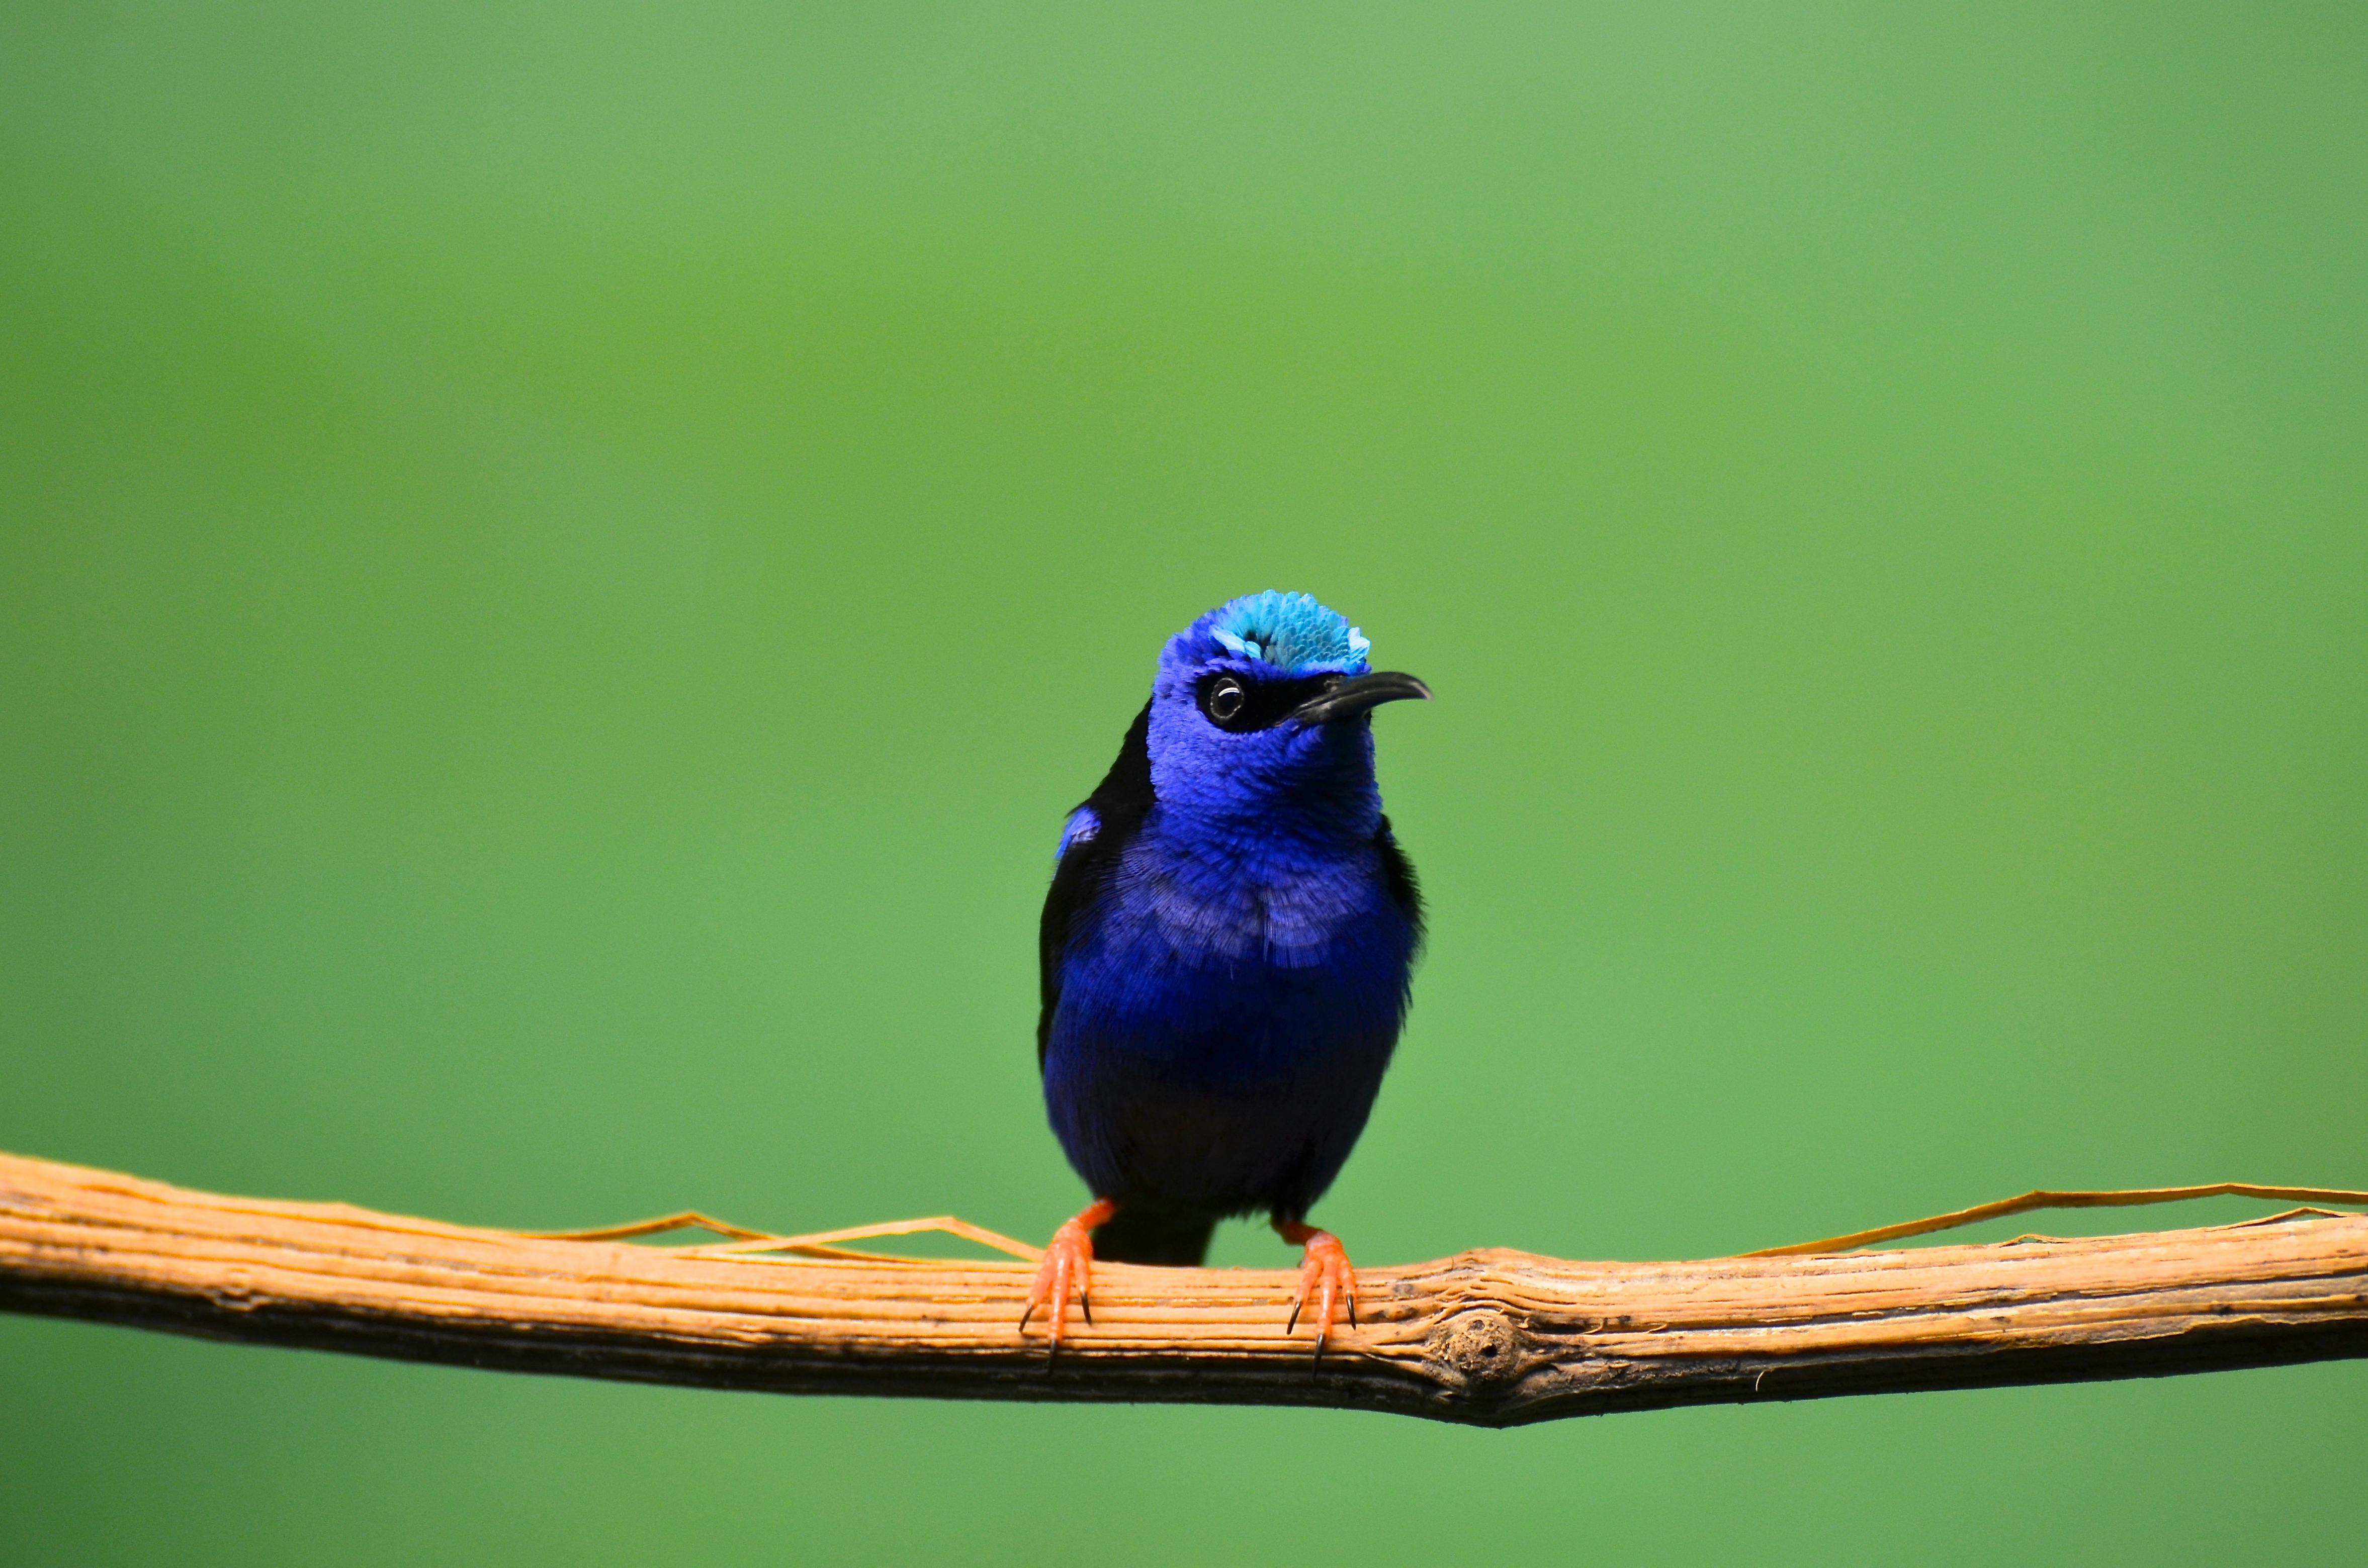 Multifaceted Meaning of Seeing a Blue Bird